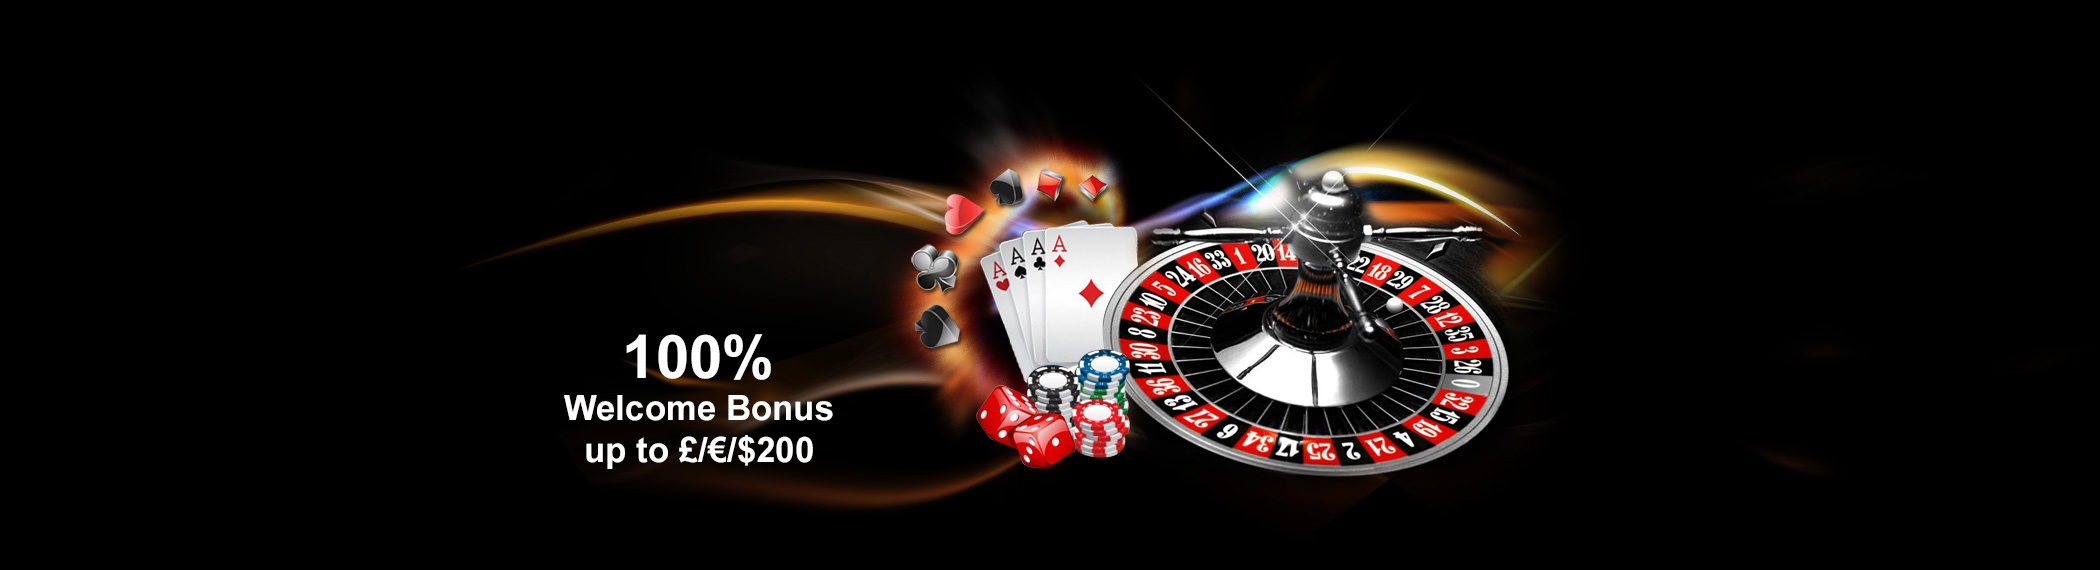 Roulette Sites UK Online | Up to £800 Offers | Top Slot Site Casino